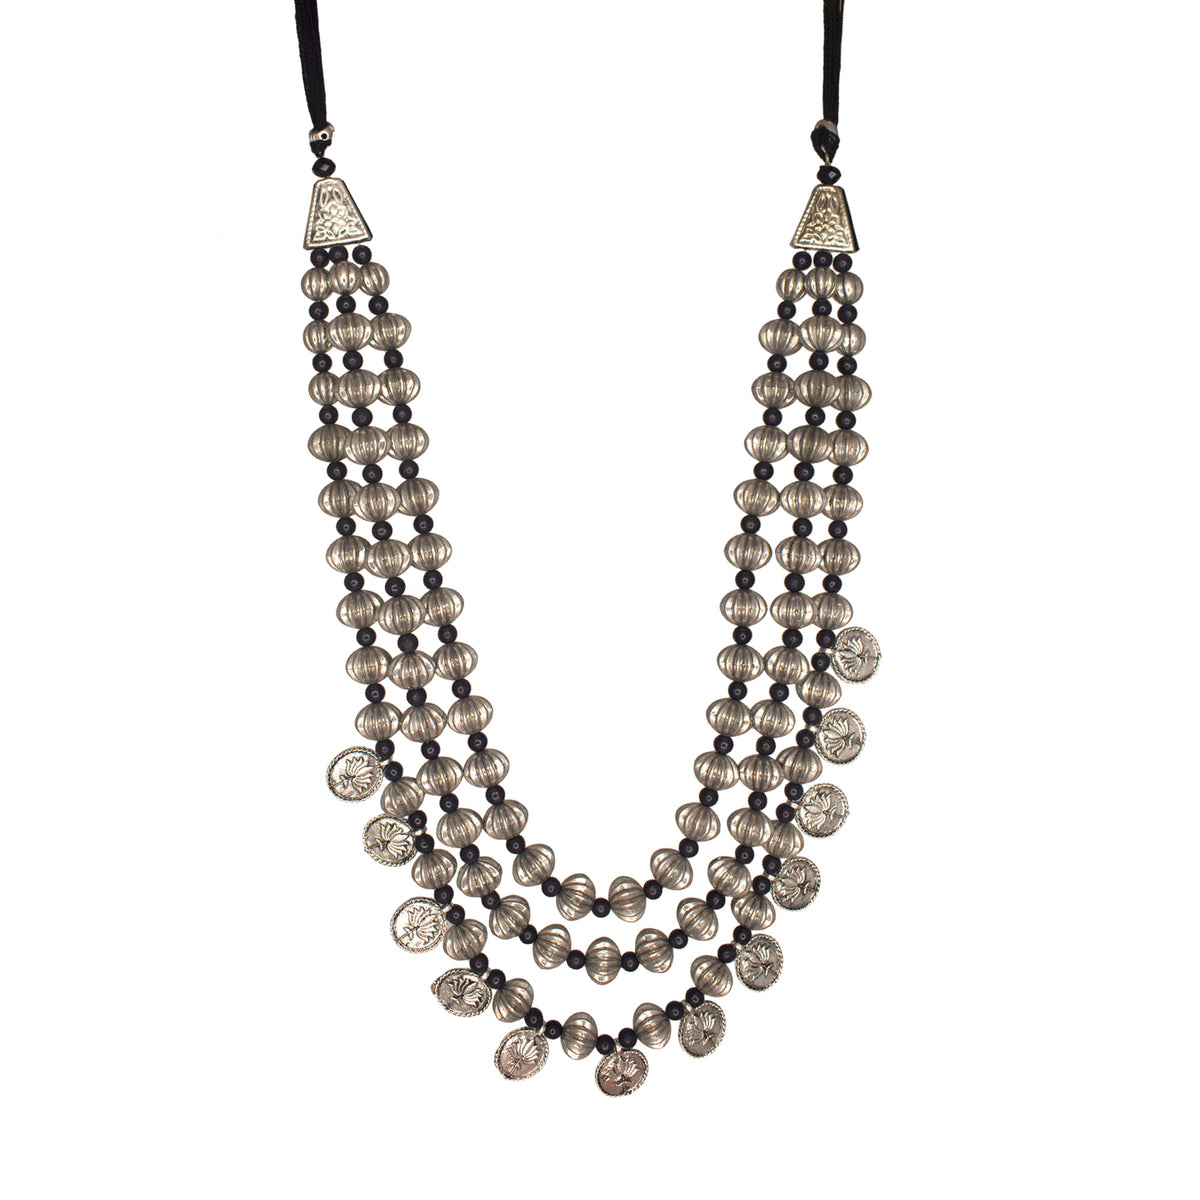 Abhinn Silver Oxidised Handmade Multi-layer Necklace With Black Beads For Women